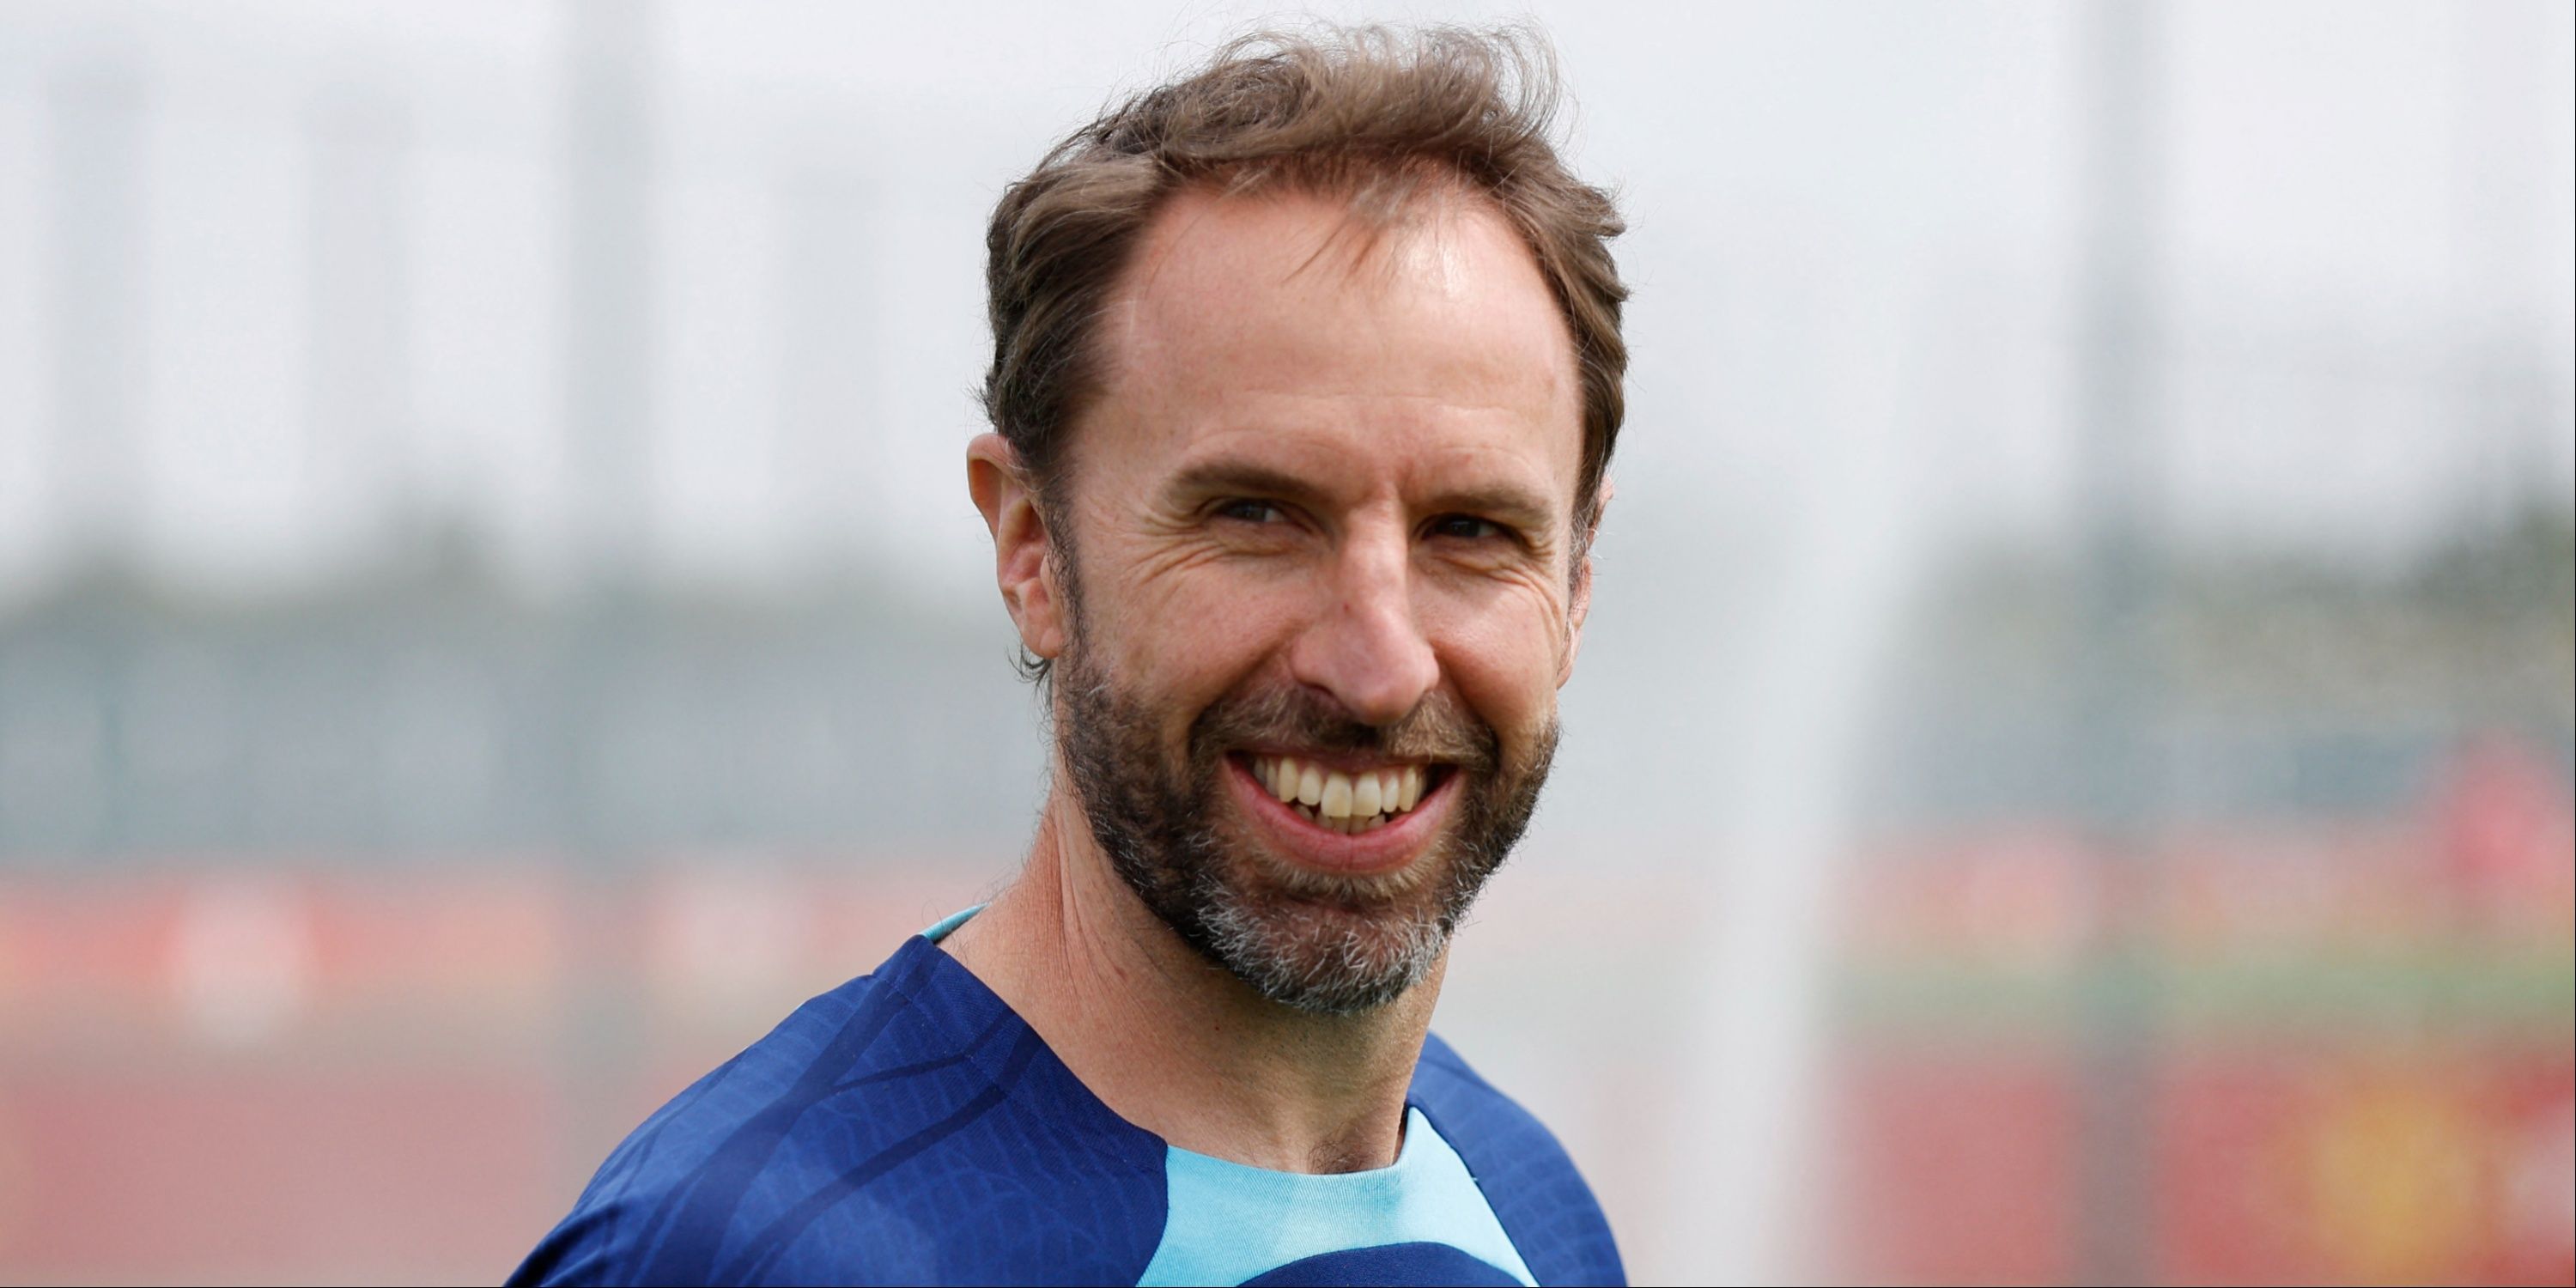 England manager Gareth Southgate smiling during a training session